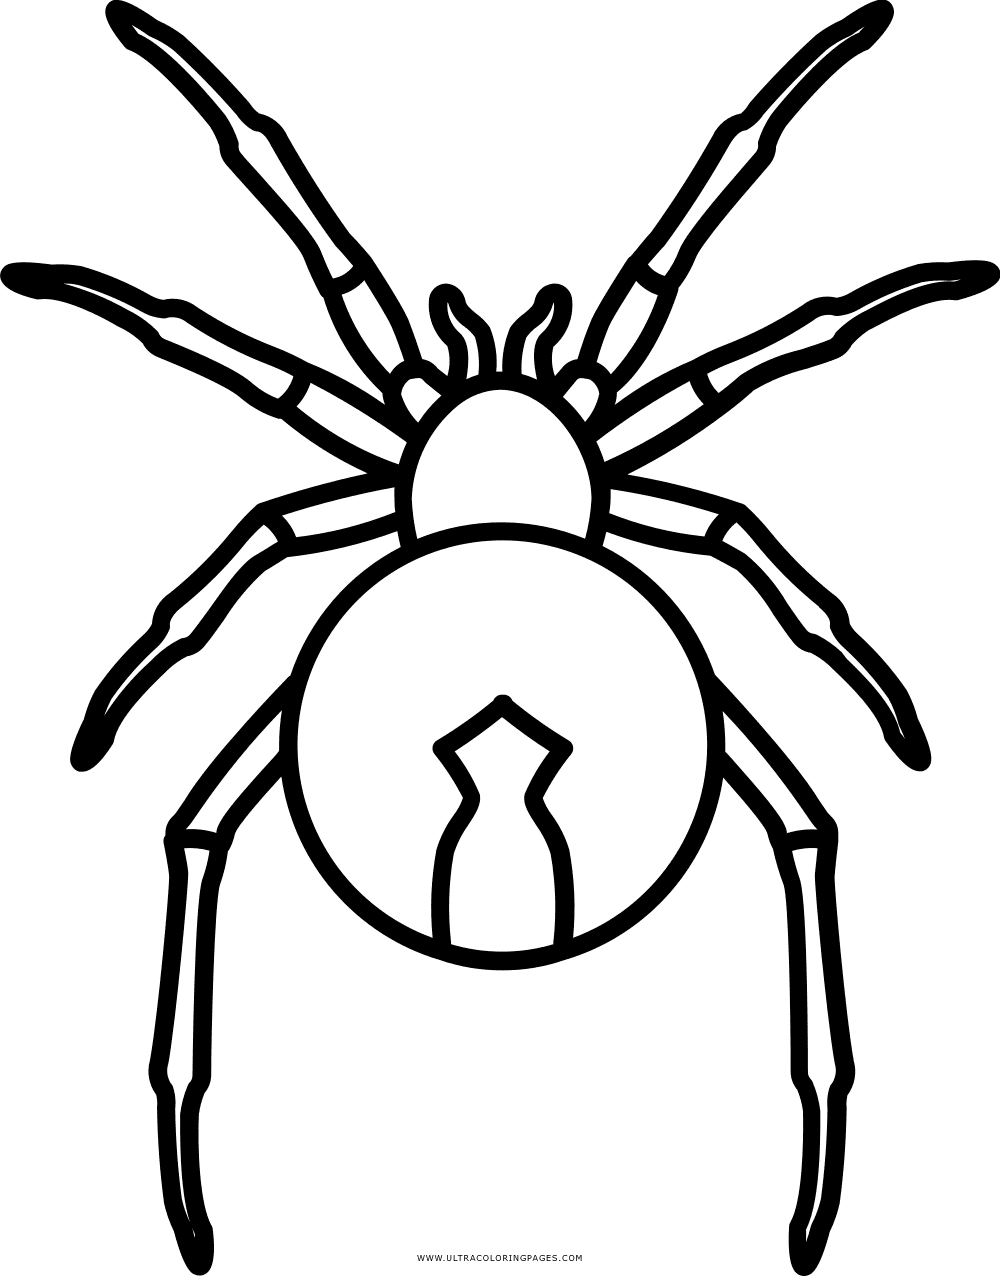 Spider Free Coloring Pages